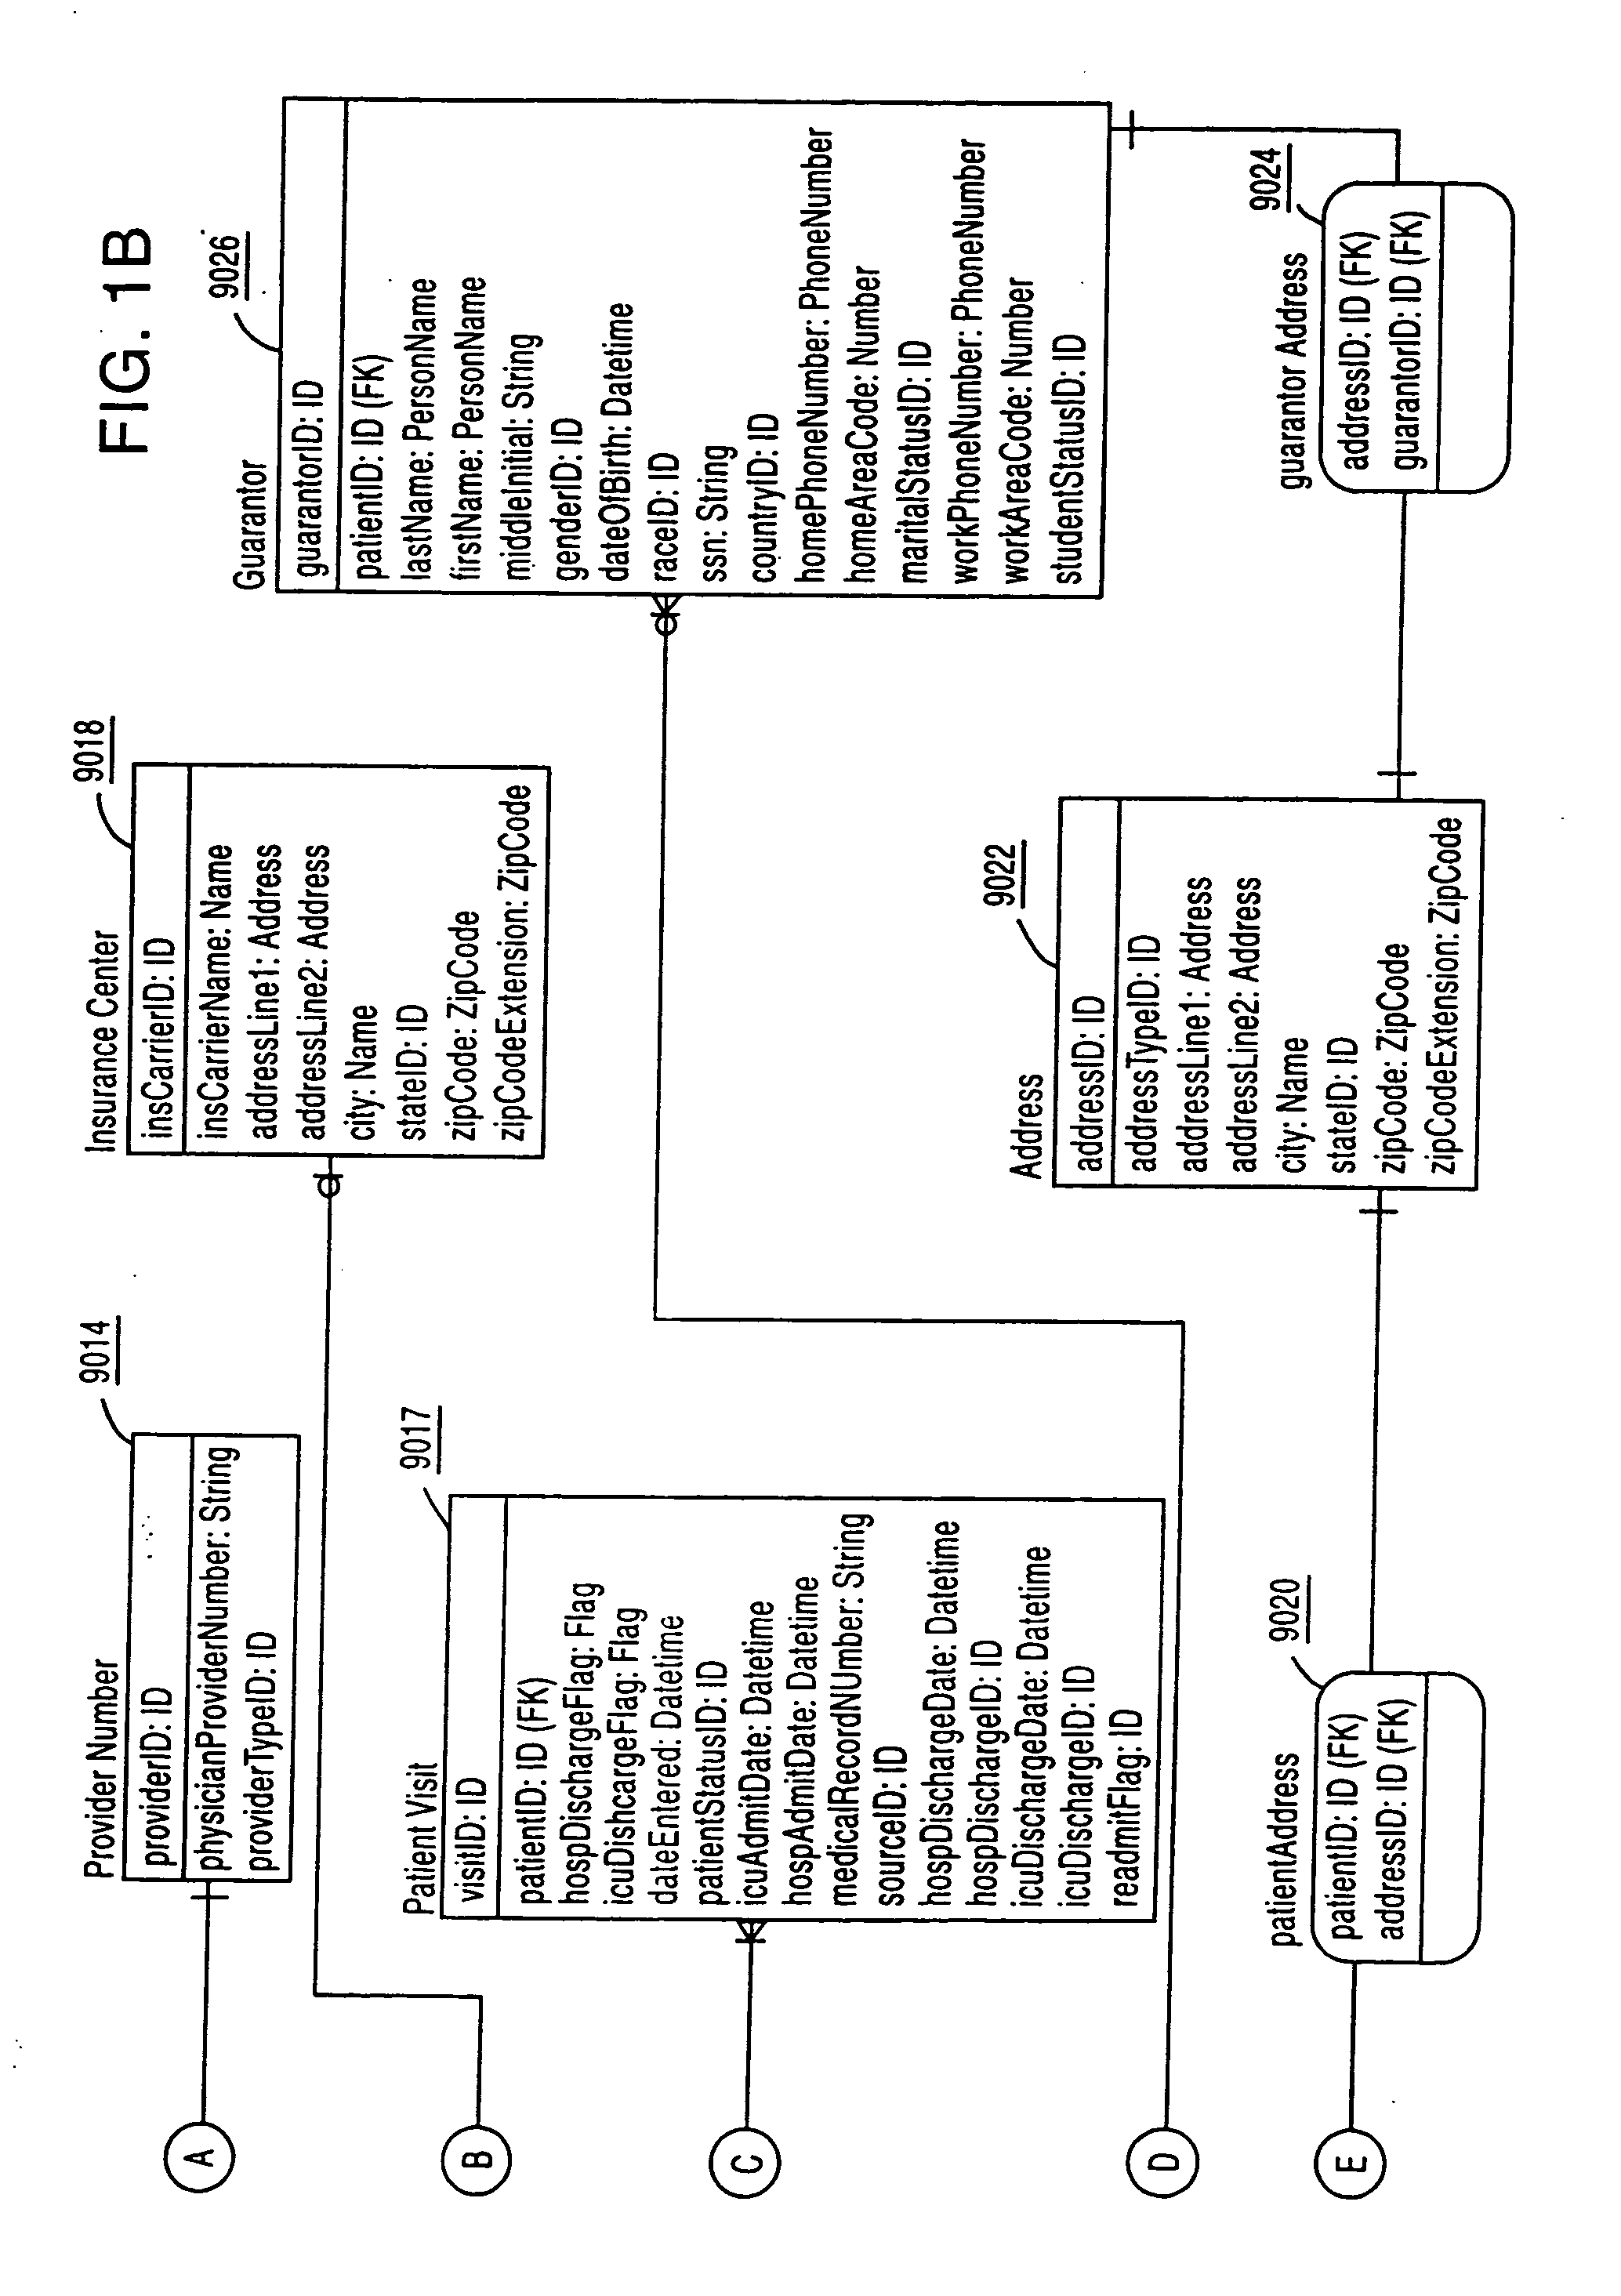 System and method for displaying a health status of hospitalized patients